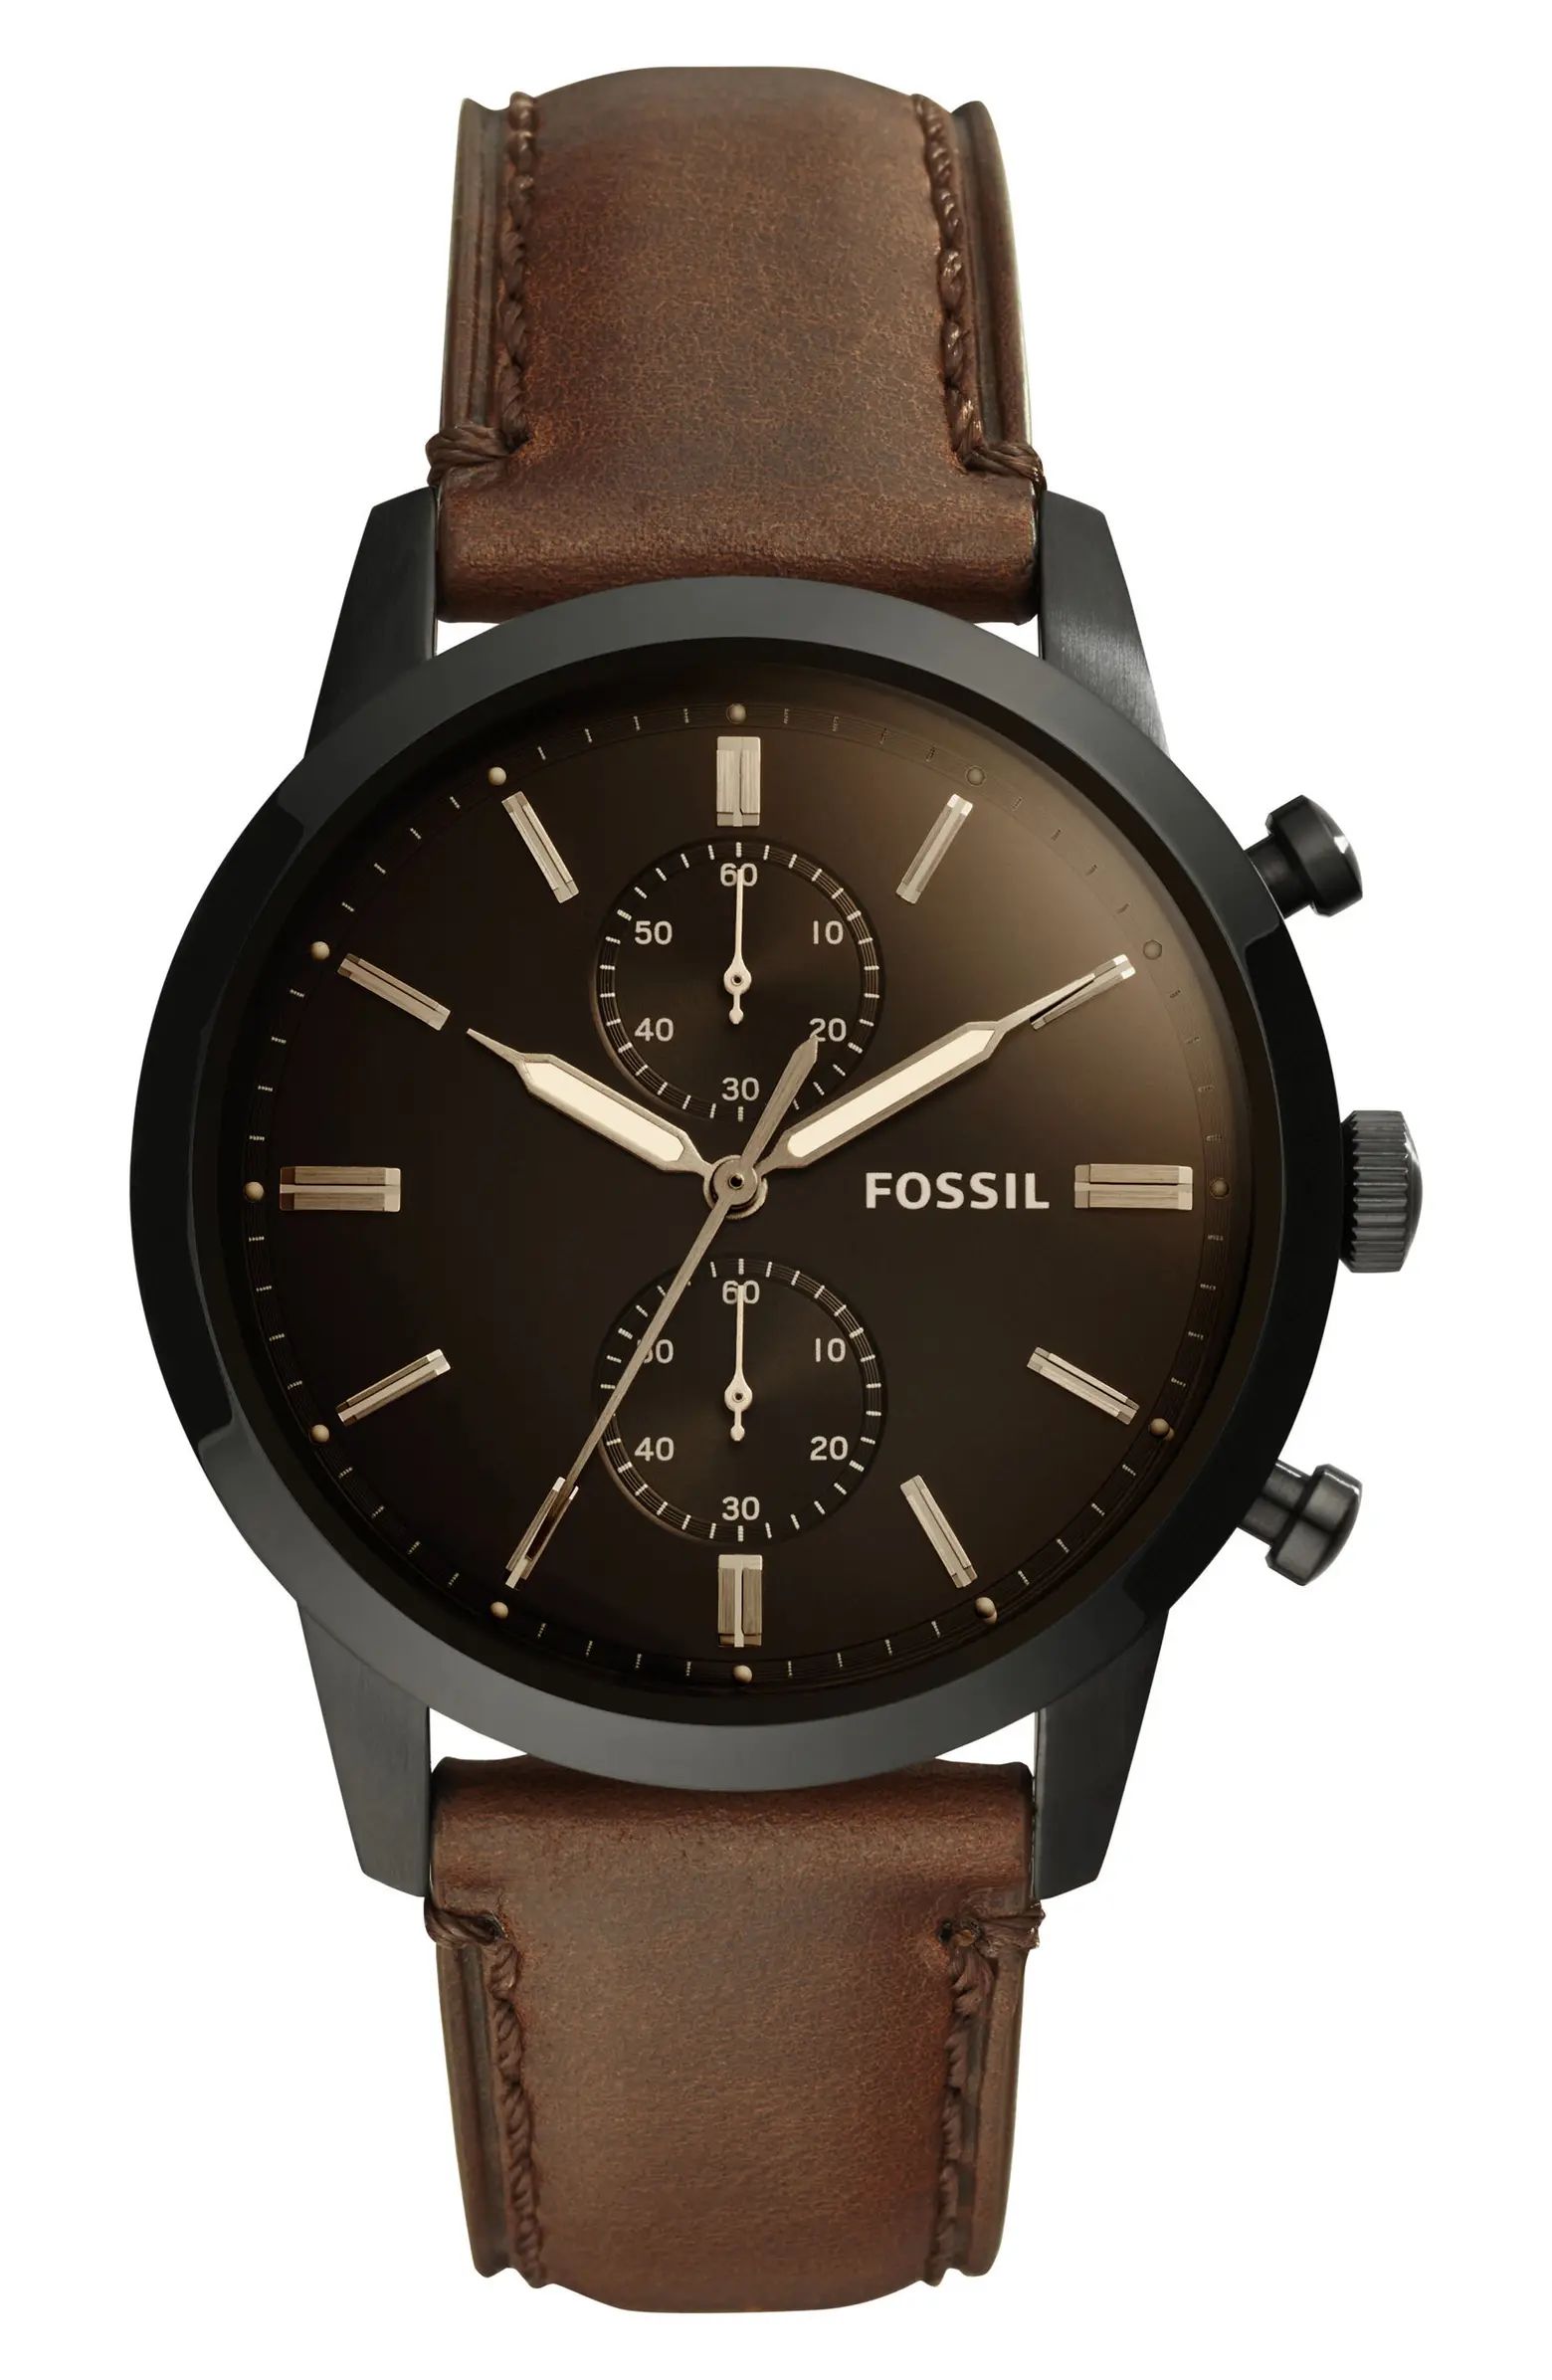 Townsman Chronograph Leather Strap Watch, 44mm | Nordstrom